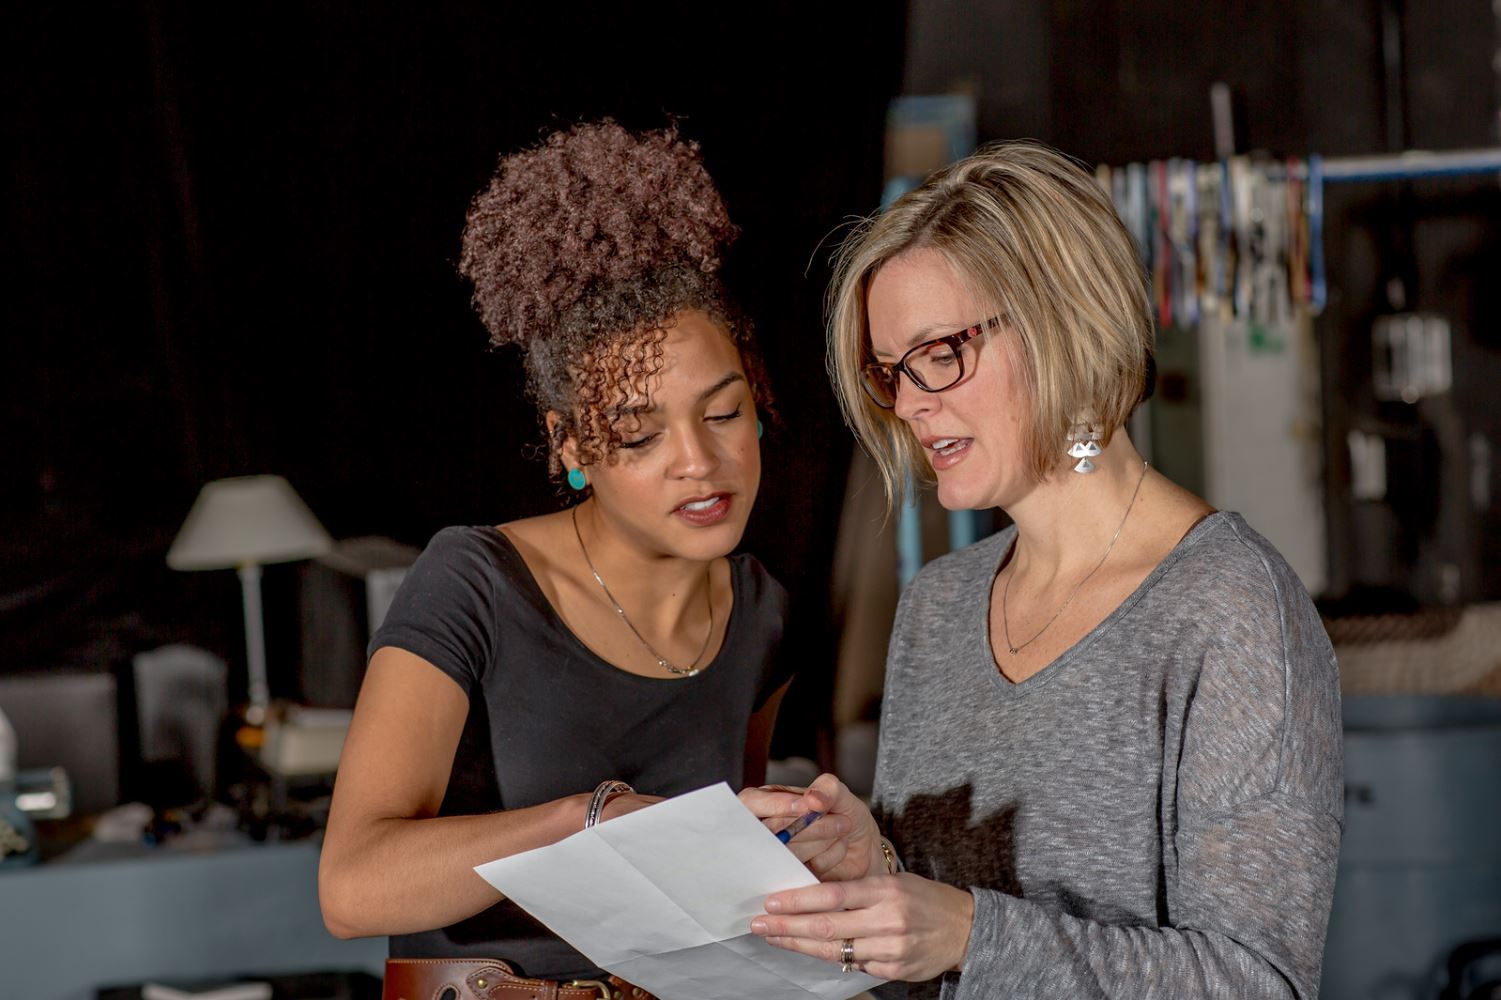 Theatre major Nicole Cowans, left, gets some one-on-one coaching from Associate Professor Carrie Baker in the Salibury Theatre.